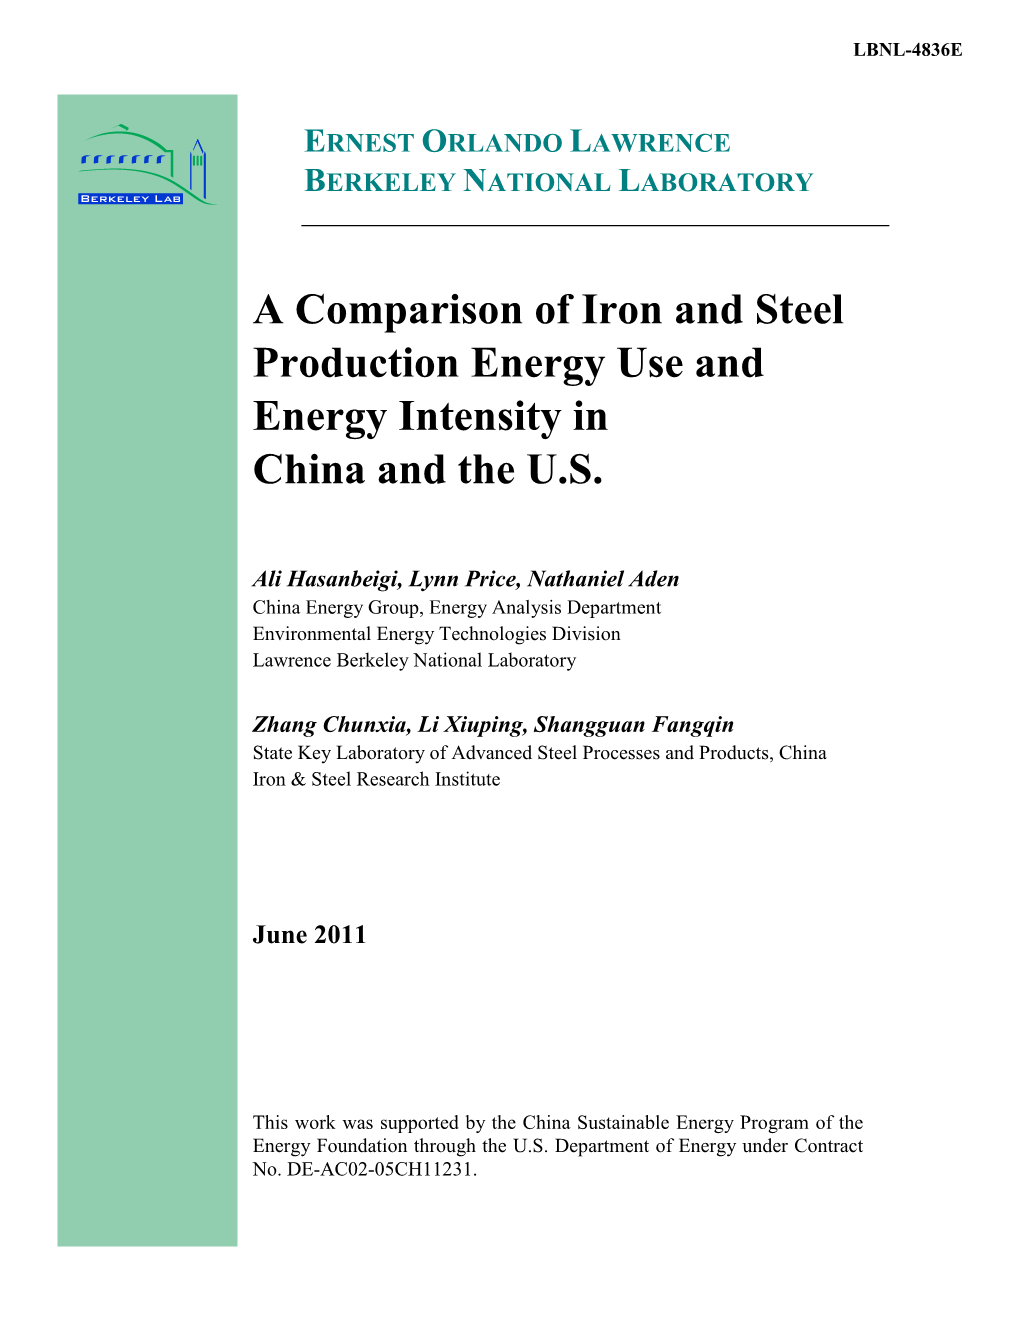 A Comparison of Iron and Steel Production Energy Use and Energy Intensity in China and the U.S